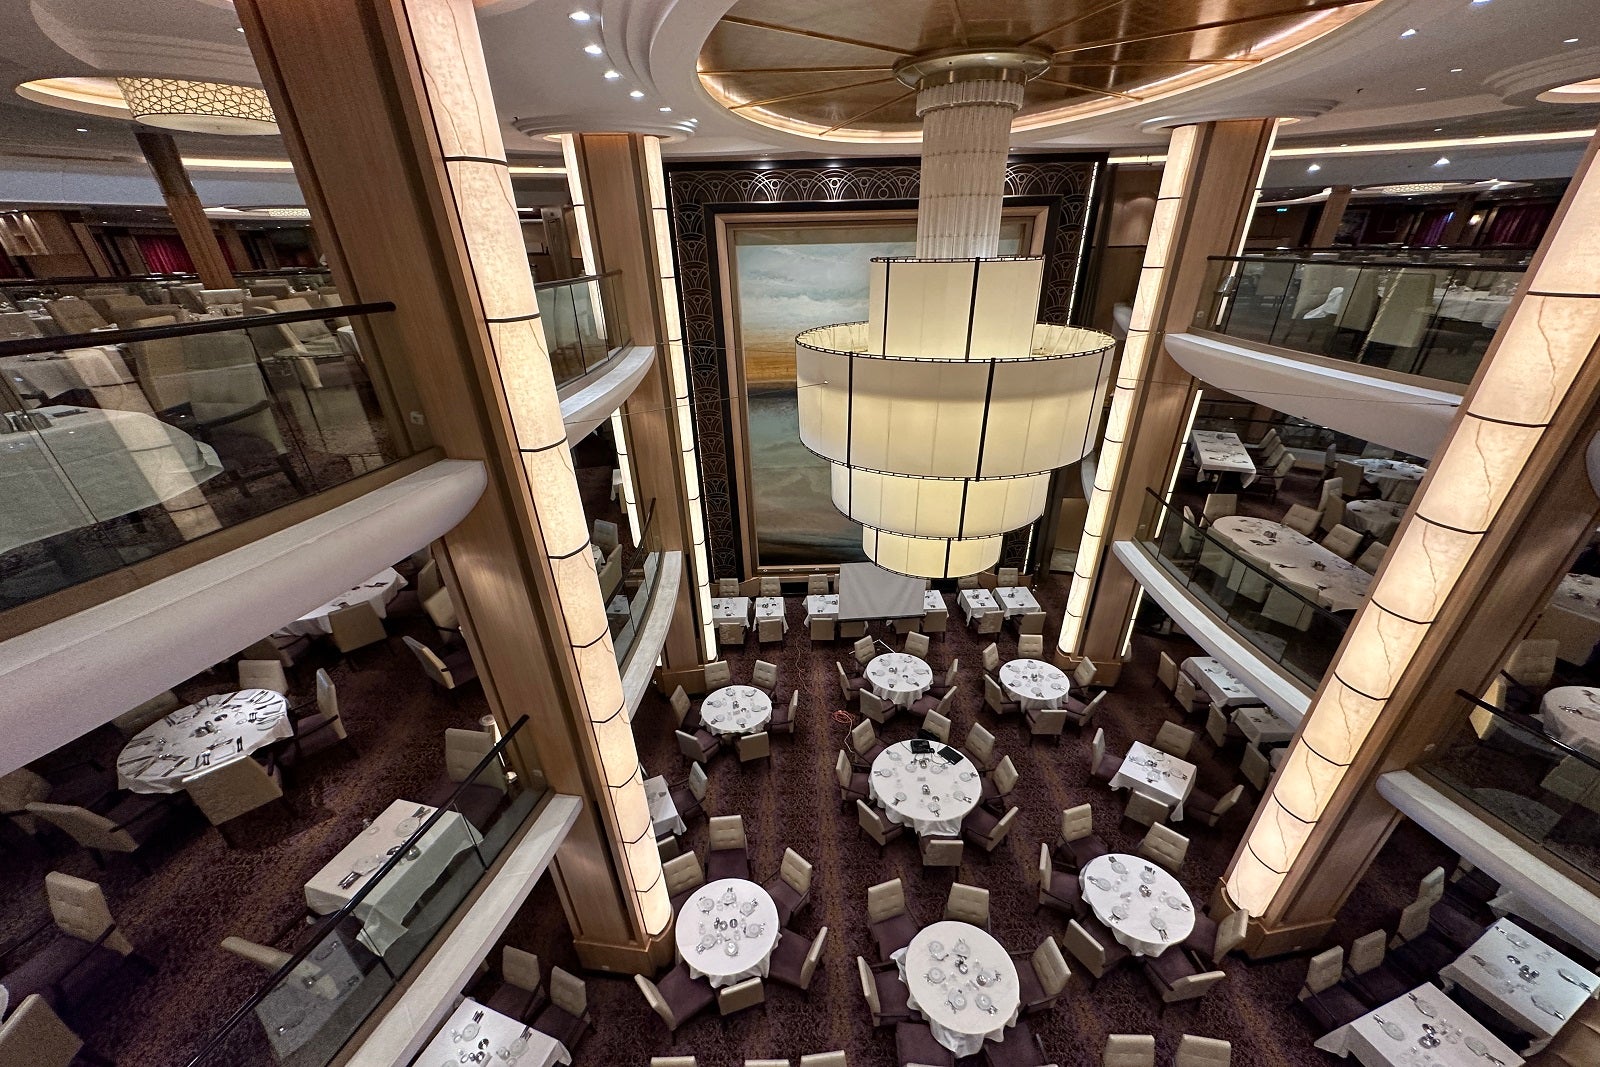 Starboard unveils upgraded Oasis of the Seas on board retail with